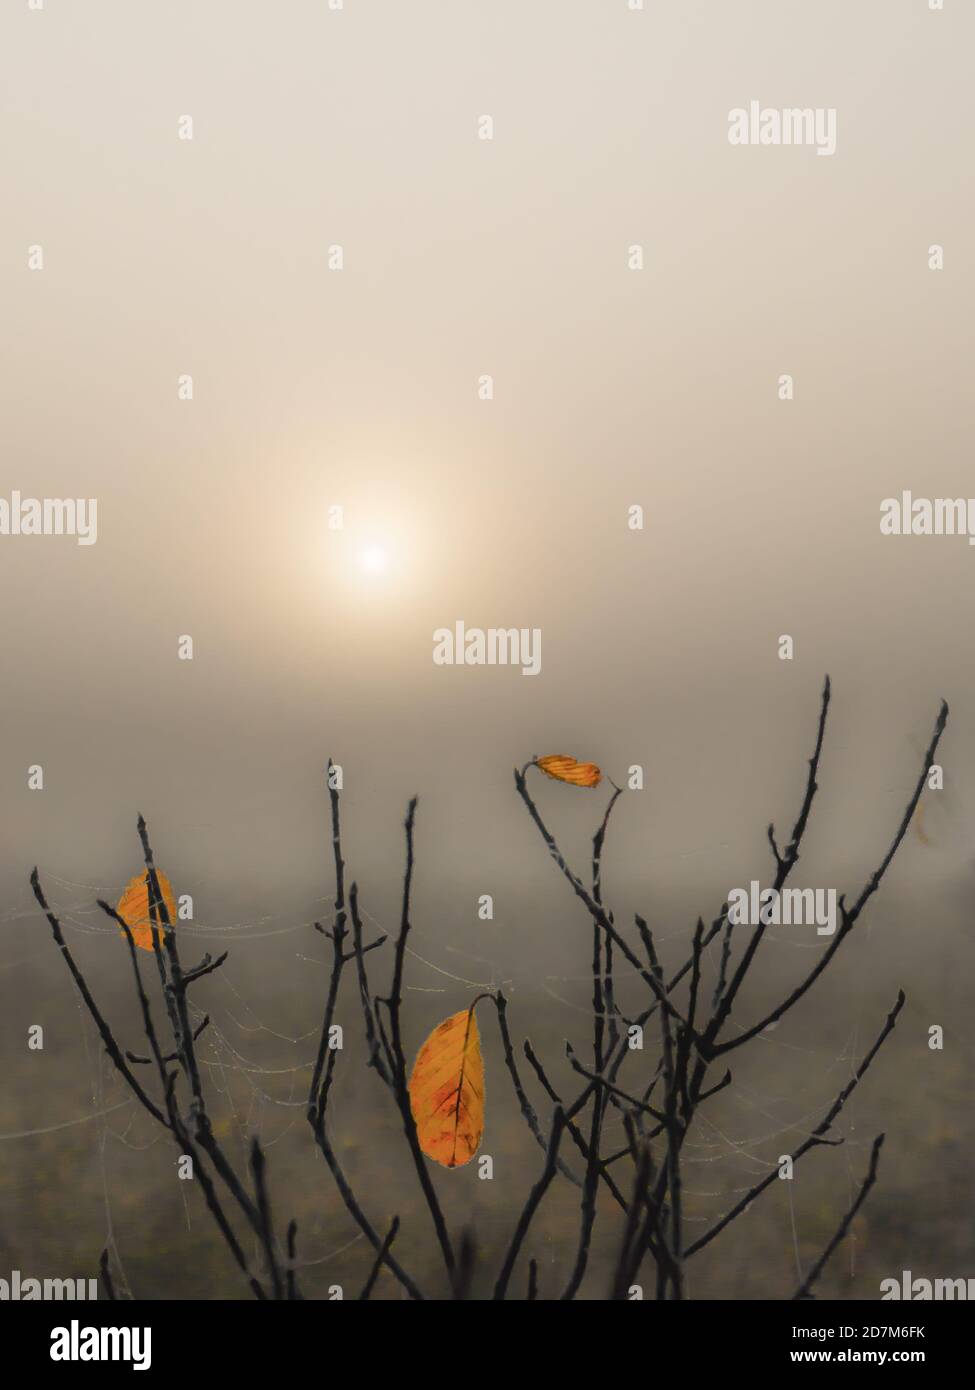 On a gray foggy morning, the last yellow leaves on the branches of a bush in an autumn field at sunrise glow Stock Photo